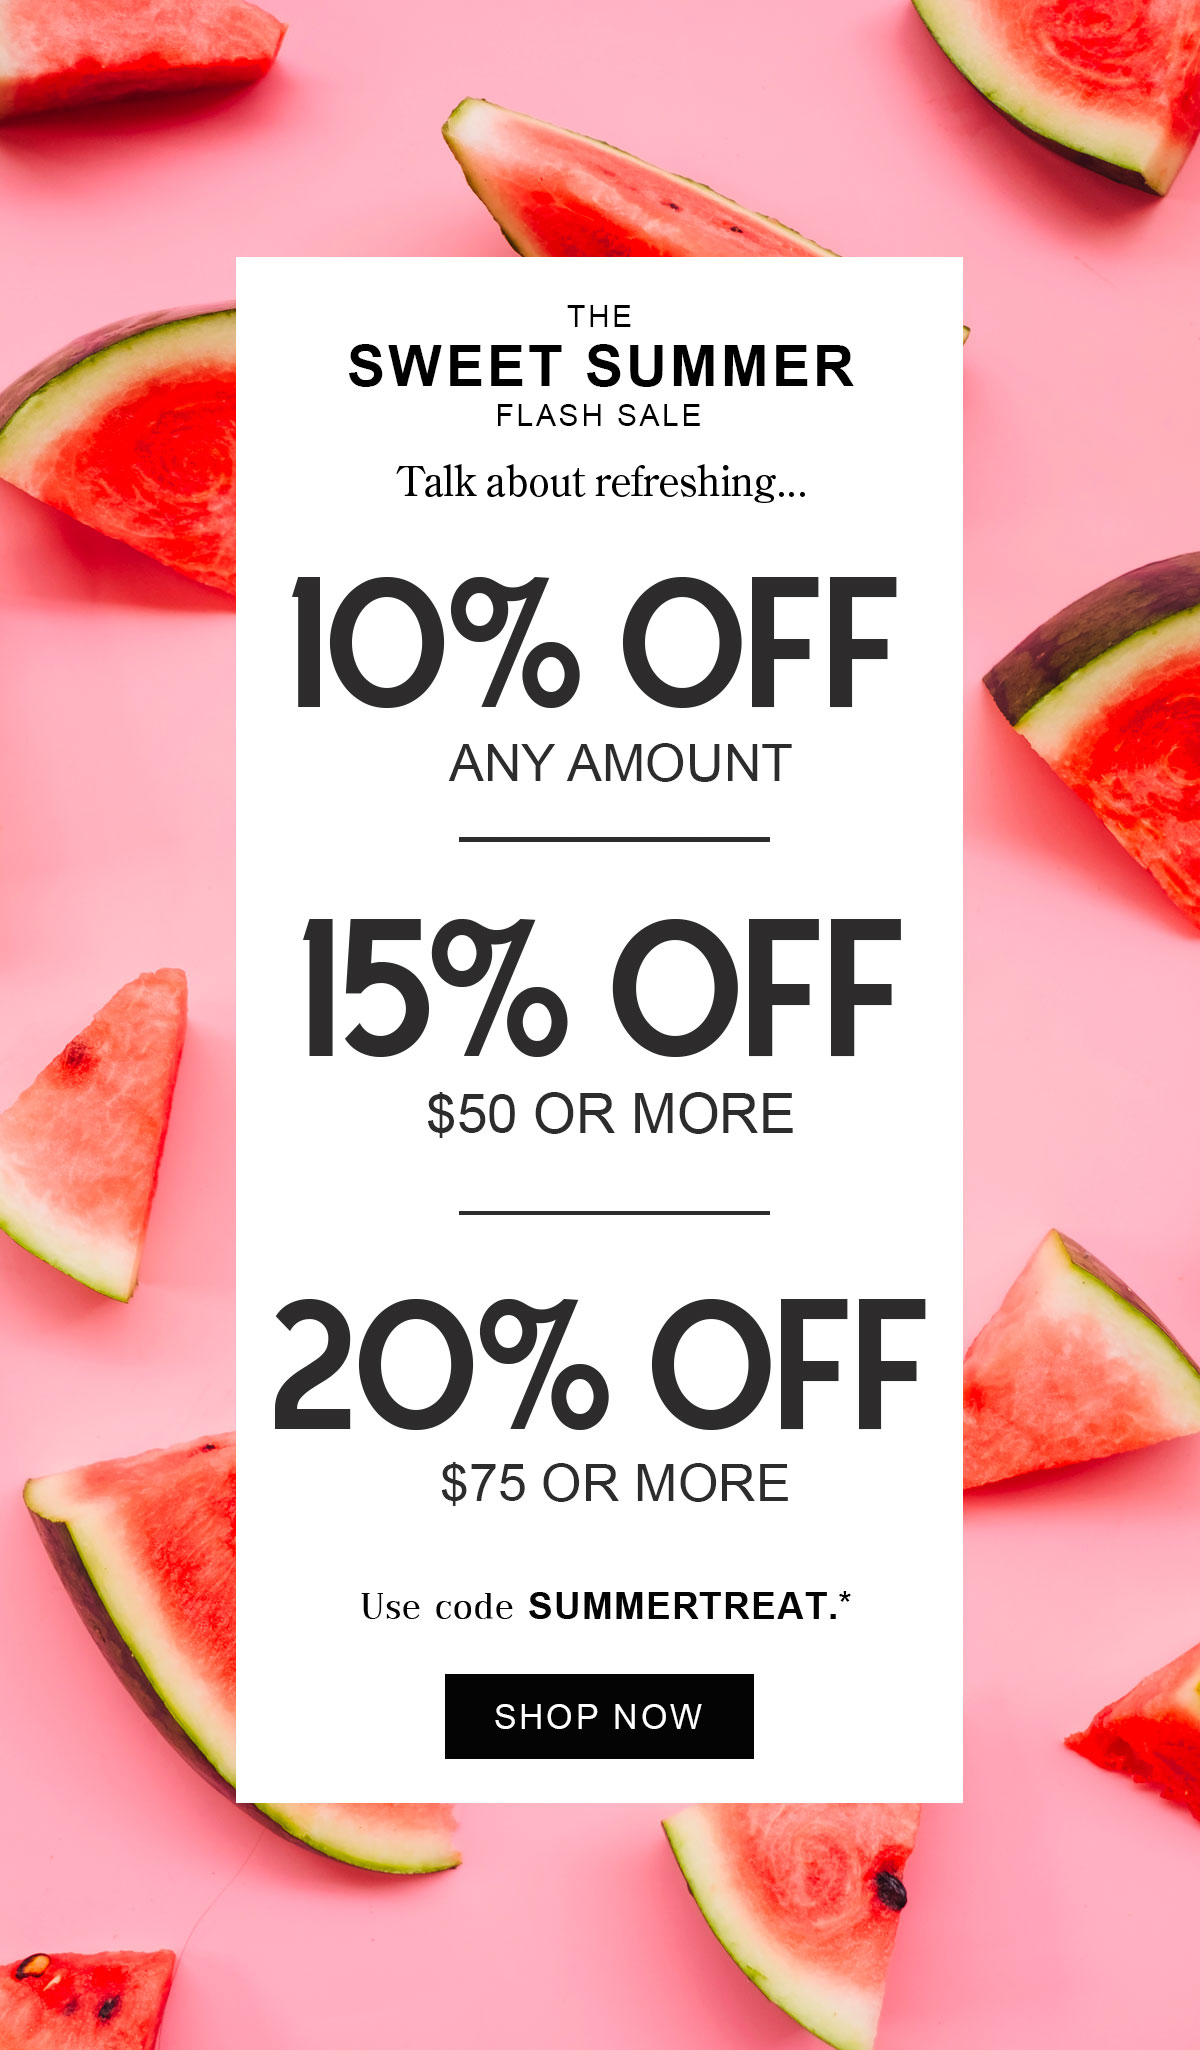 The Sweet Summer Flash Sale Talk about refreshing.   10% off  Any Amount  15% off $50 or More  20% off $75 or More  Use code SUMMERTREAT* Shop Now